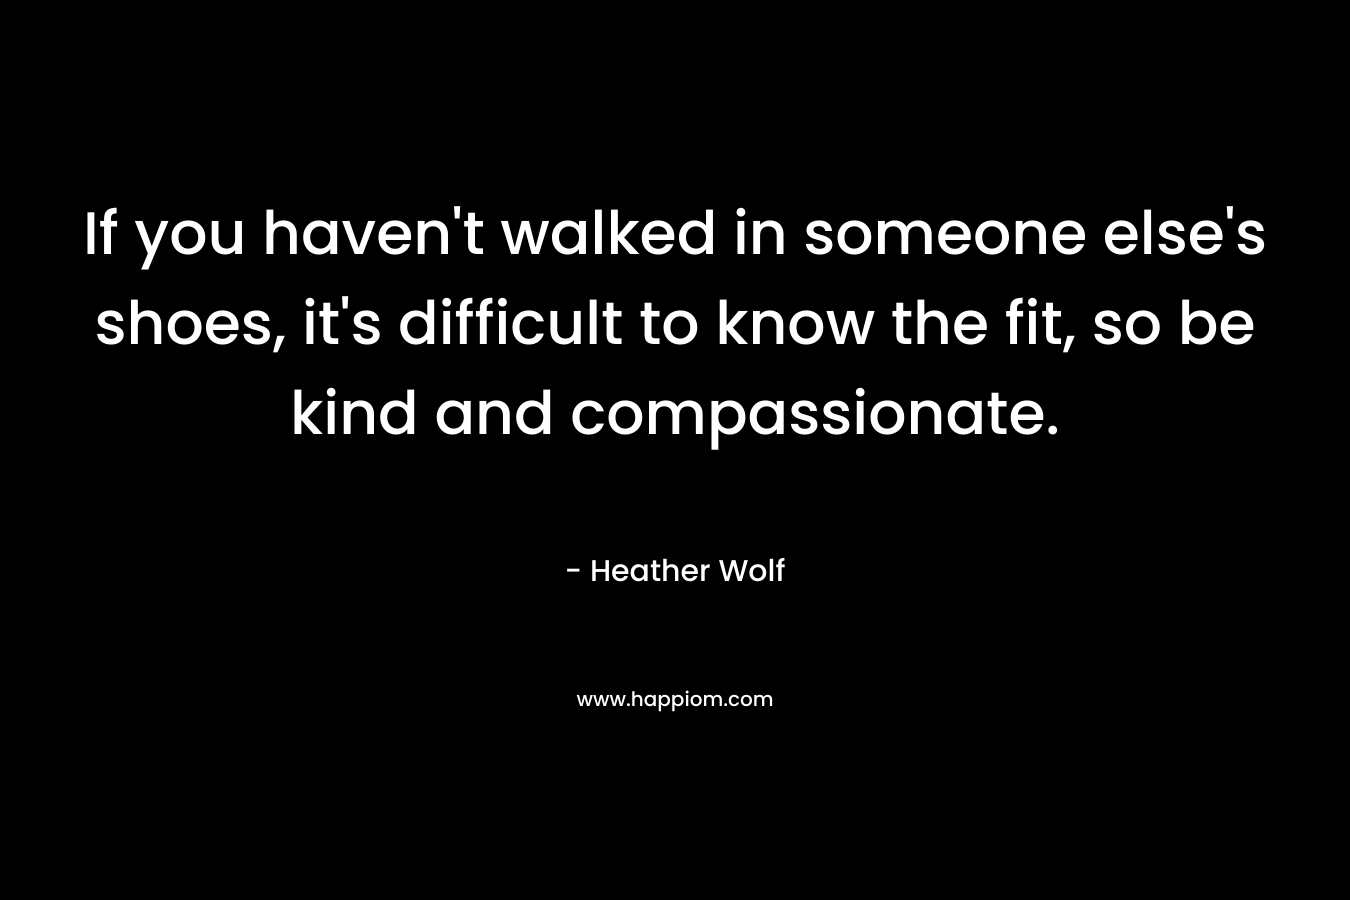 If you haven't walked in someone else's shoes, it's difficult to know the fit, so be kind and compassionate.